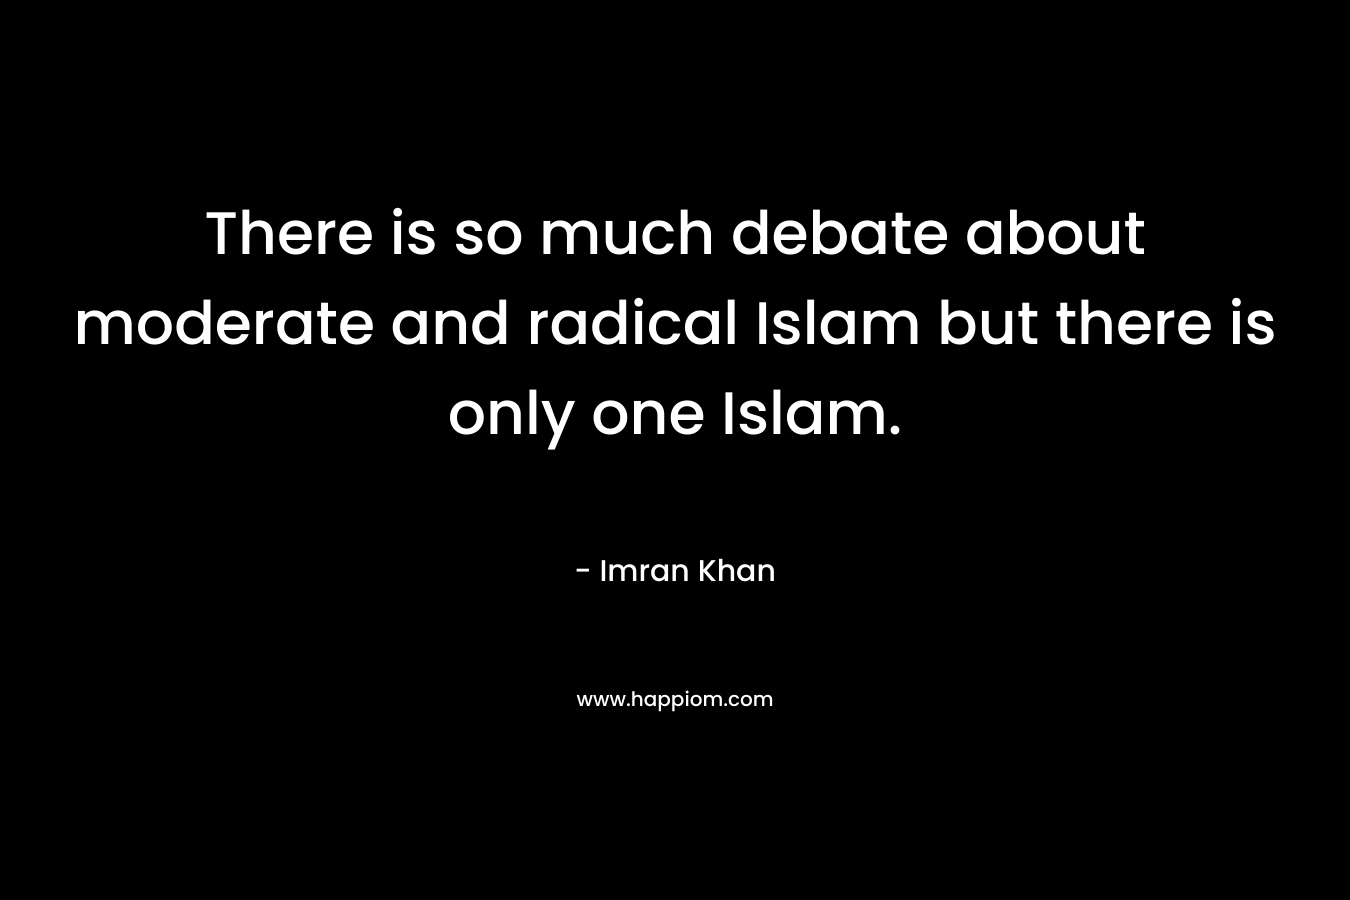 There is so much debate about moderate and radical Islam but there is only one Islam. – Imran Khan